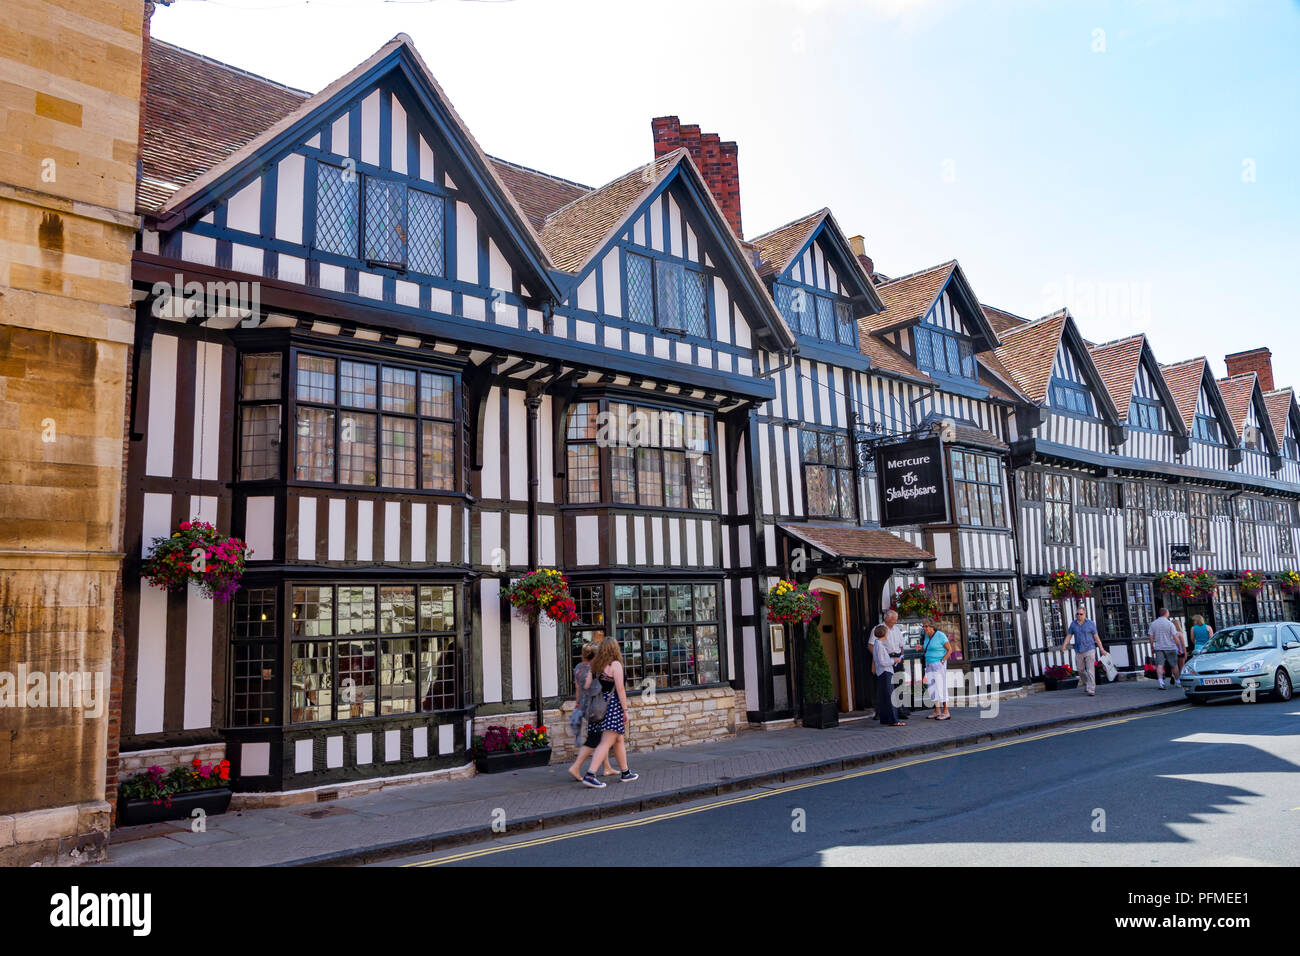 The Shakespeare Mercure Hotel on Chapel Street in Stratford Upon Avon Stock Photo